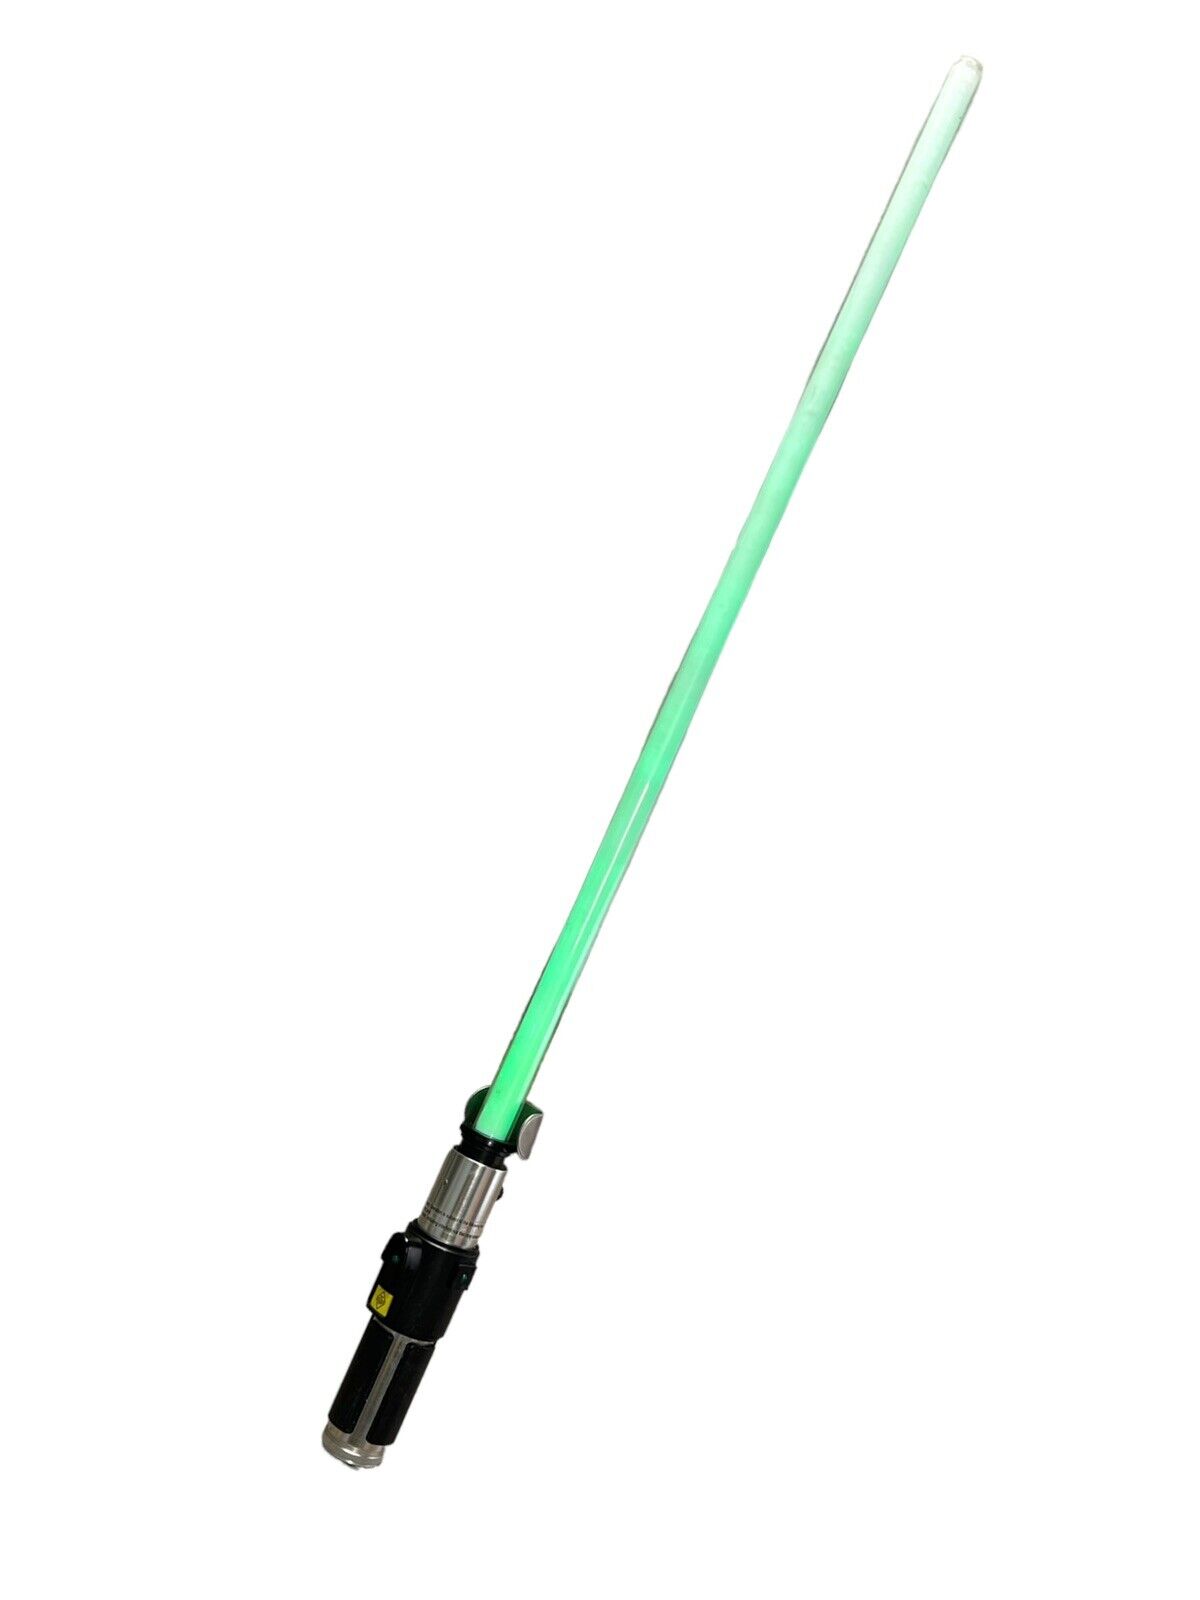 Master Replicas YODA FORCE FX LIGHTSABER  2007 Lucasfilm See Video